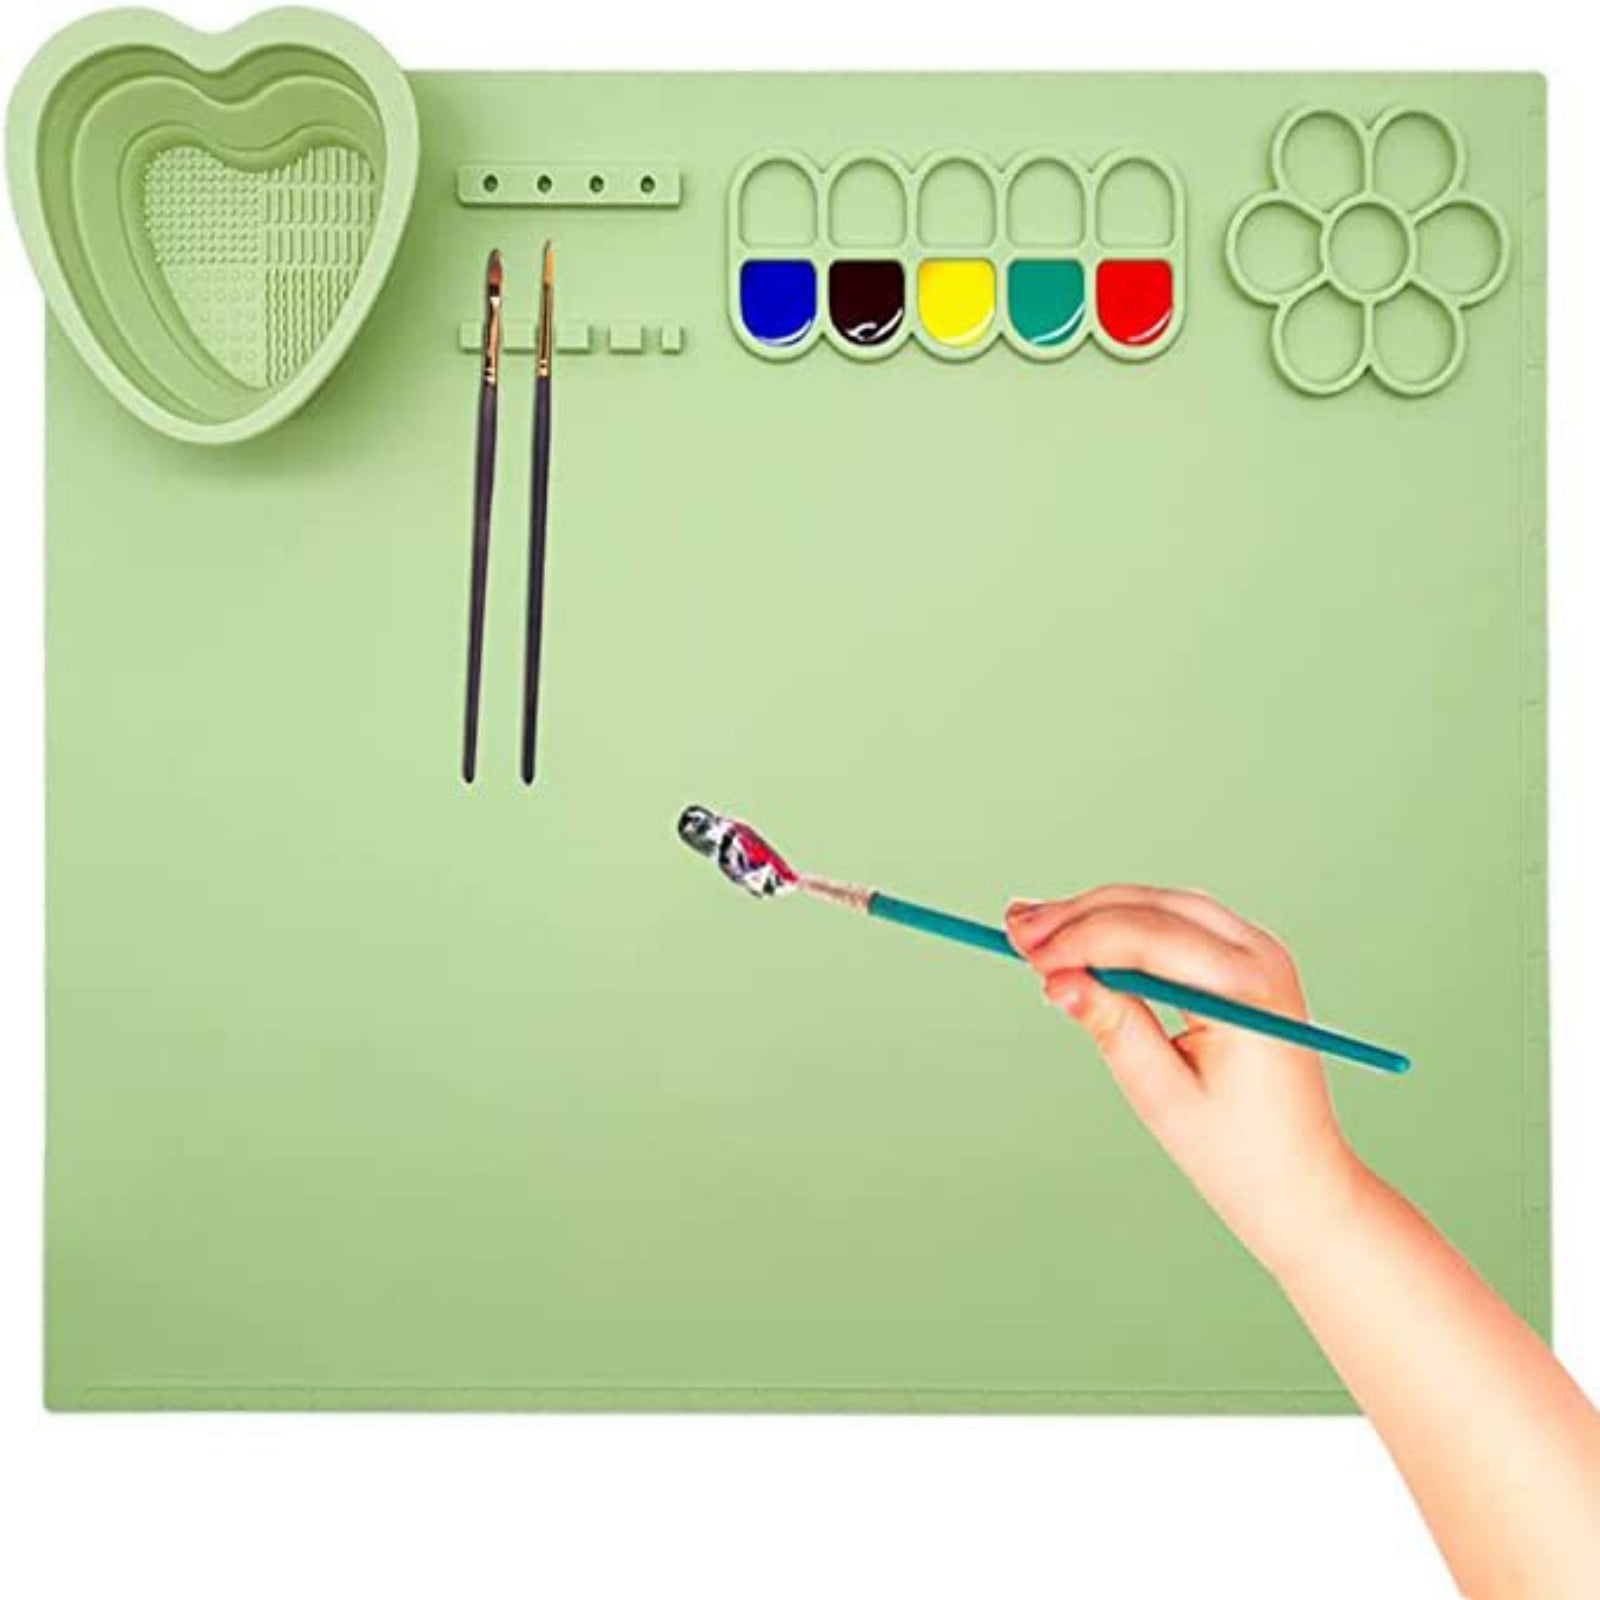 Litake Paint Palette,Thick Silicone Craft Mat,20×16 inches Large